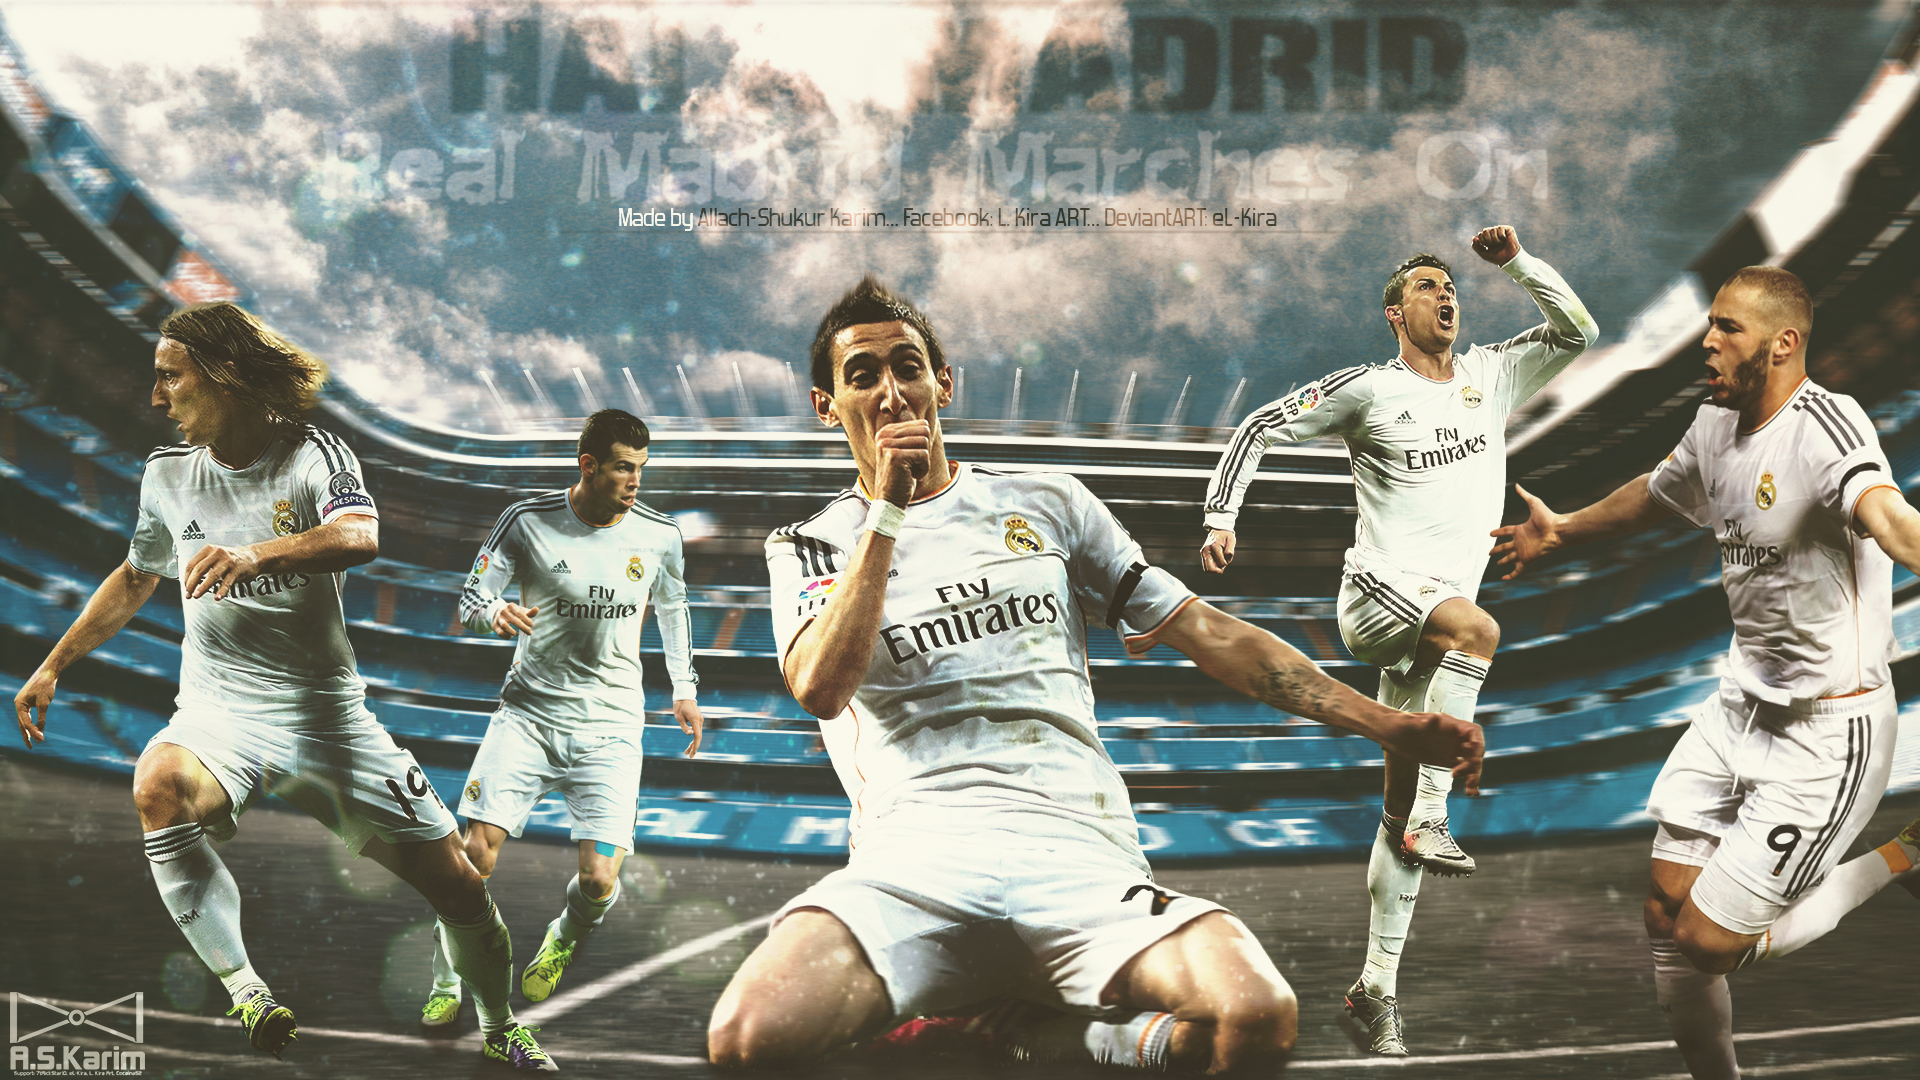 Real Madrid Marches On Wallpaper By El Kira